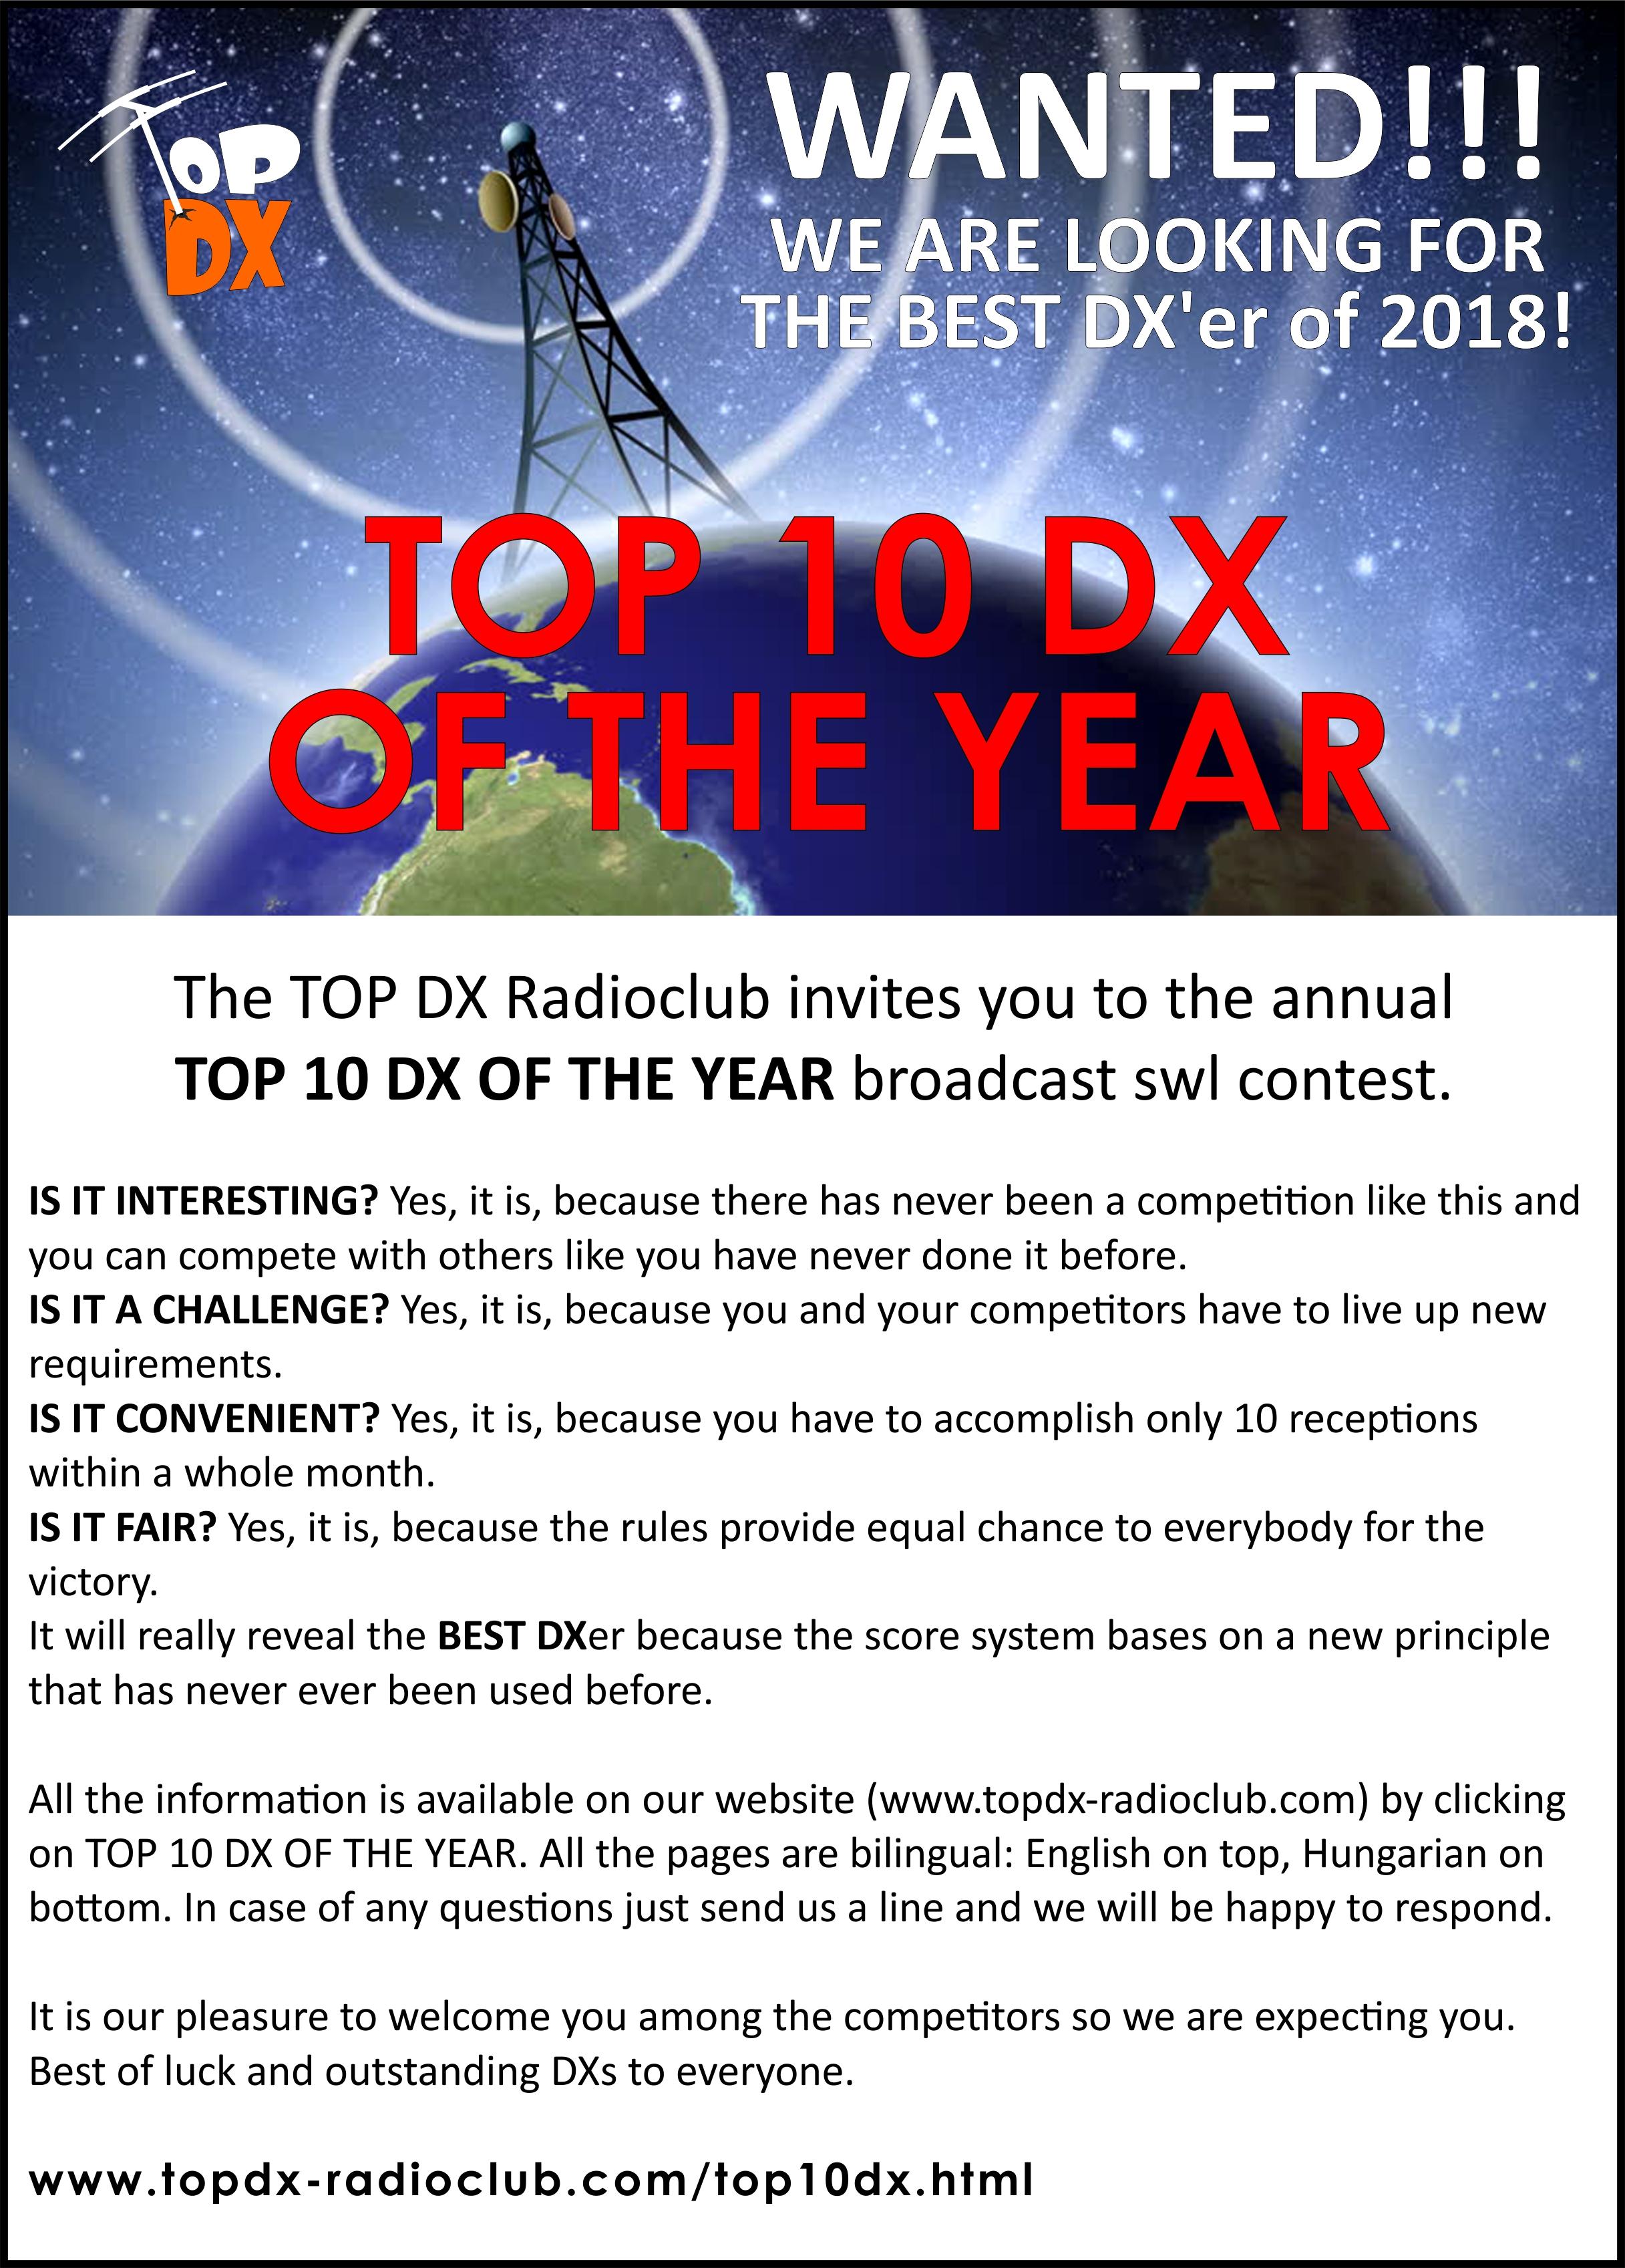 Top 10 DX of the Year